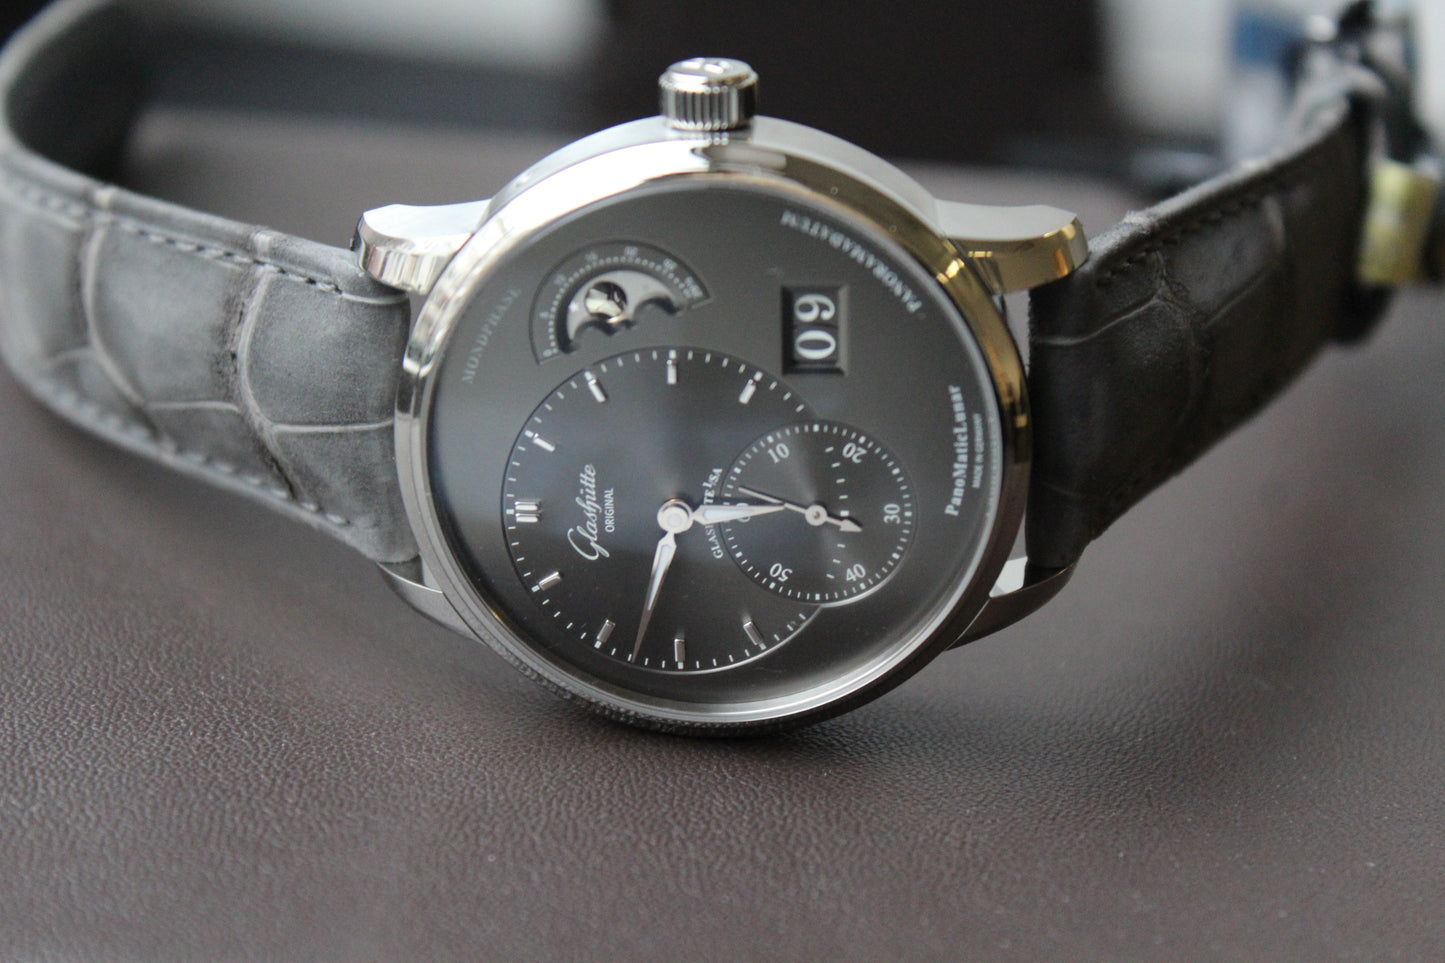 Glashütte Original PanoMaticLunar 40mm 1-90-02-43-32-62 (previously 1-90-02-43-32-05) stainless steel case, dark gray dial, shiny silver moon